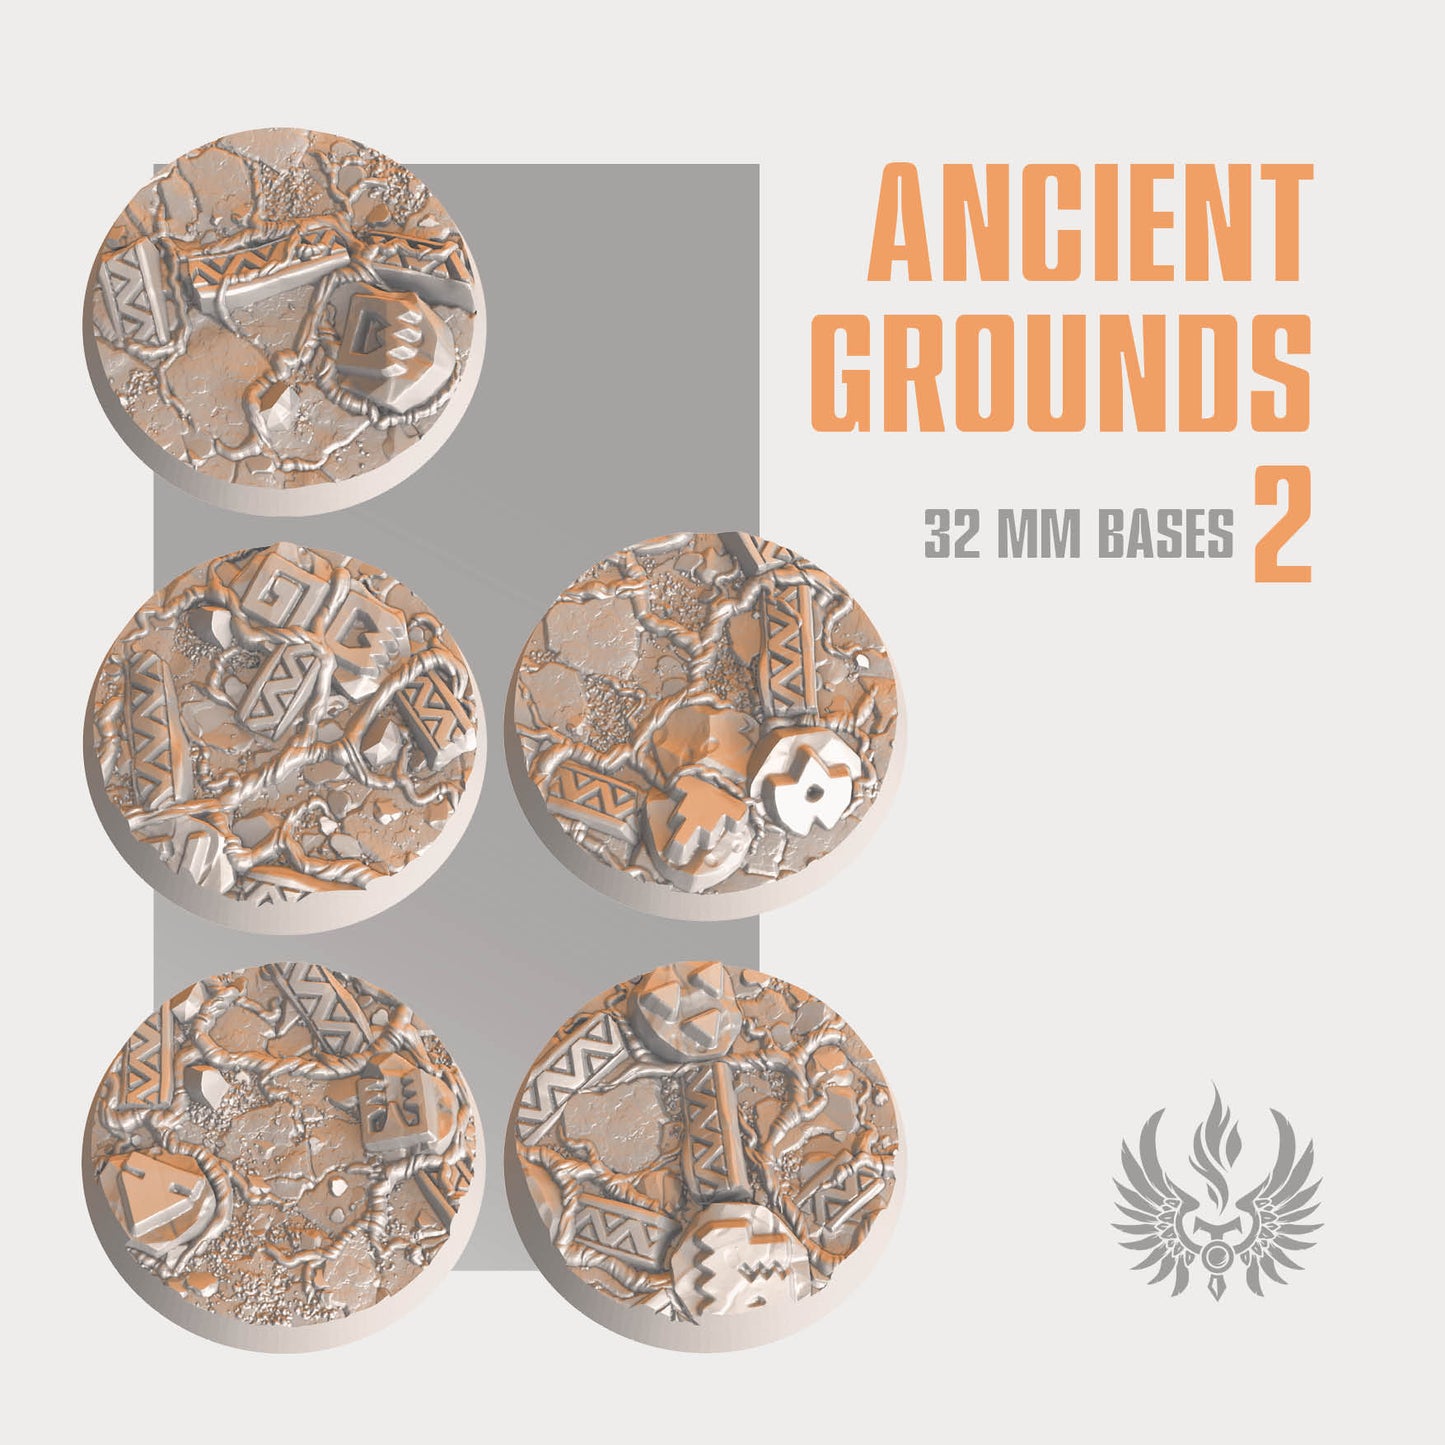 Ancient grounds bases 32 mm, set 2